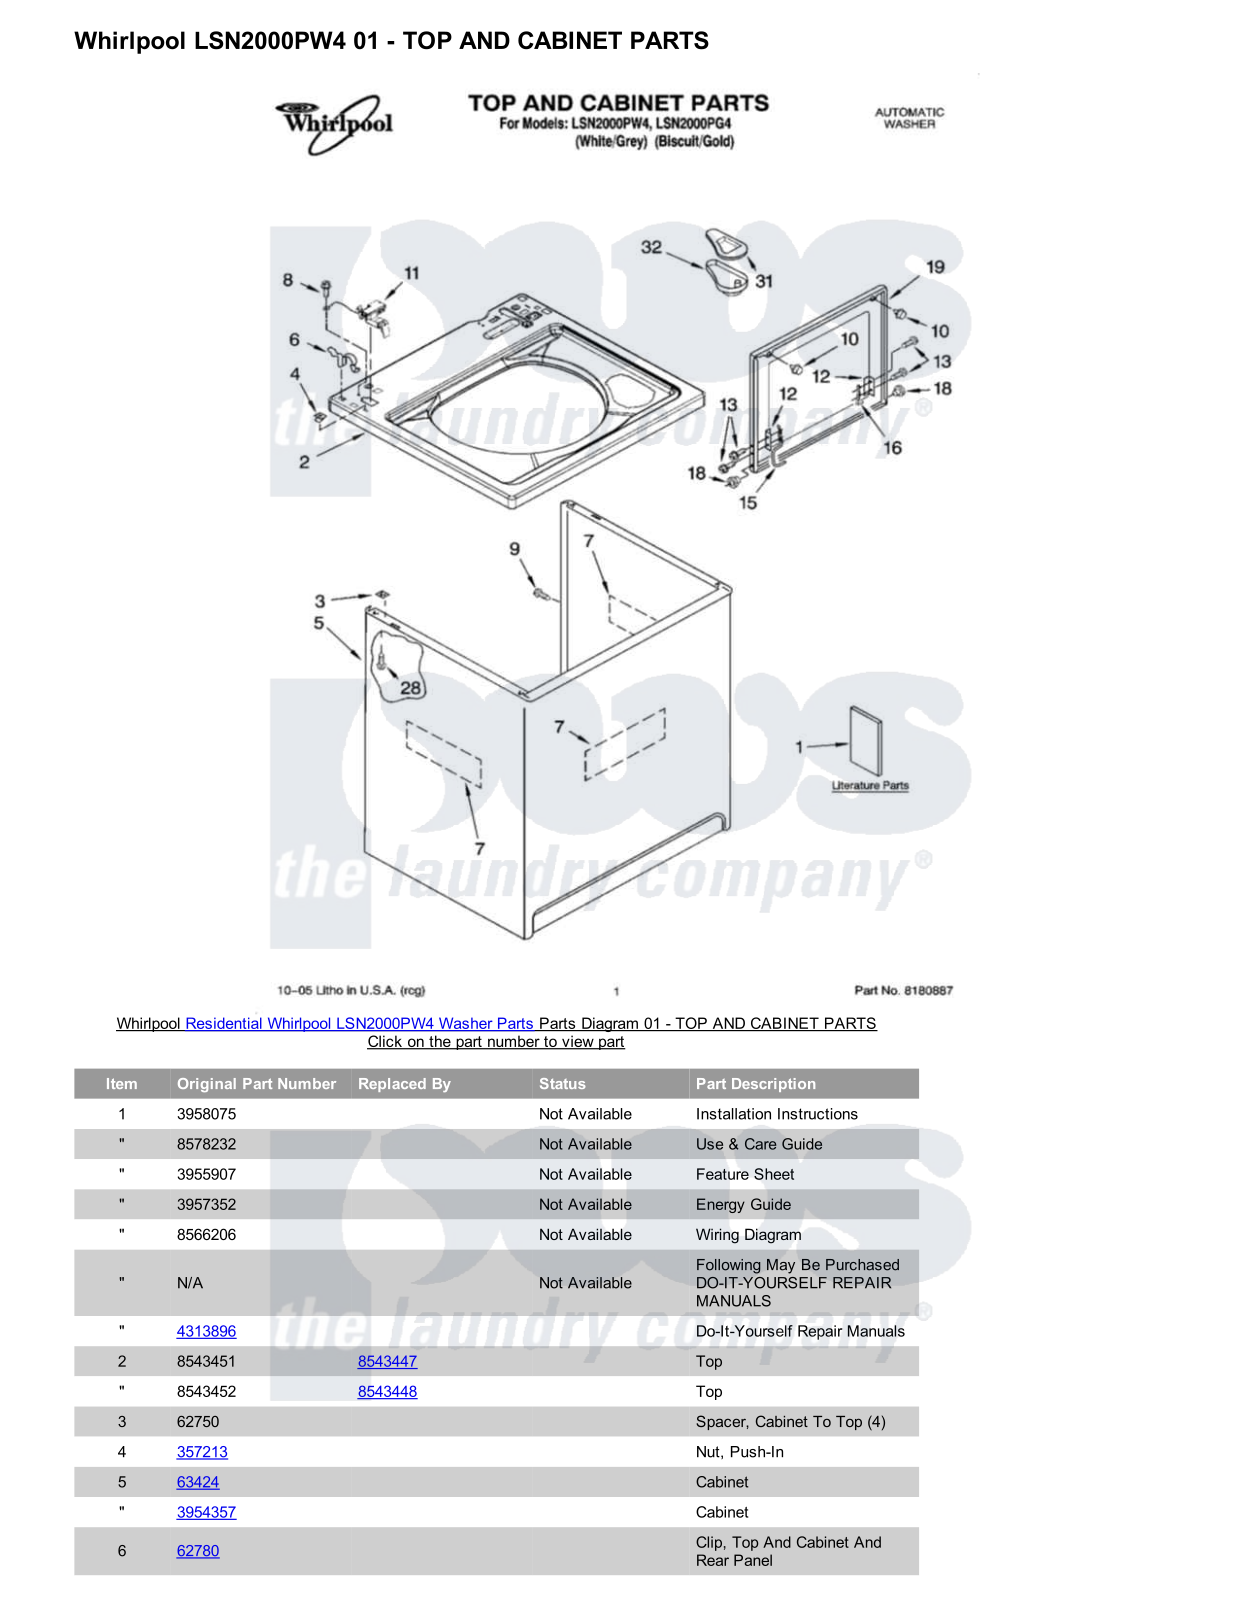 Whirlpool LSN2000PW4 Parts Diagram